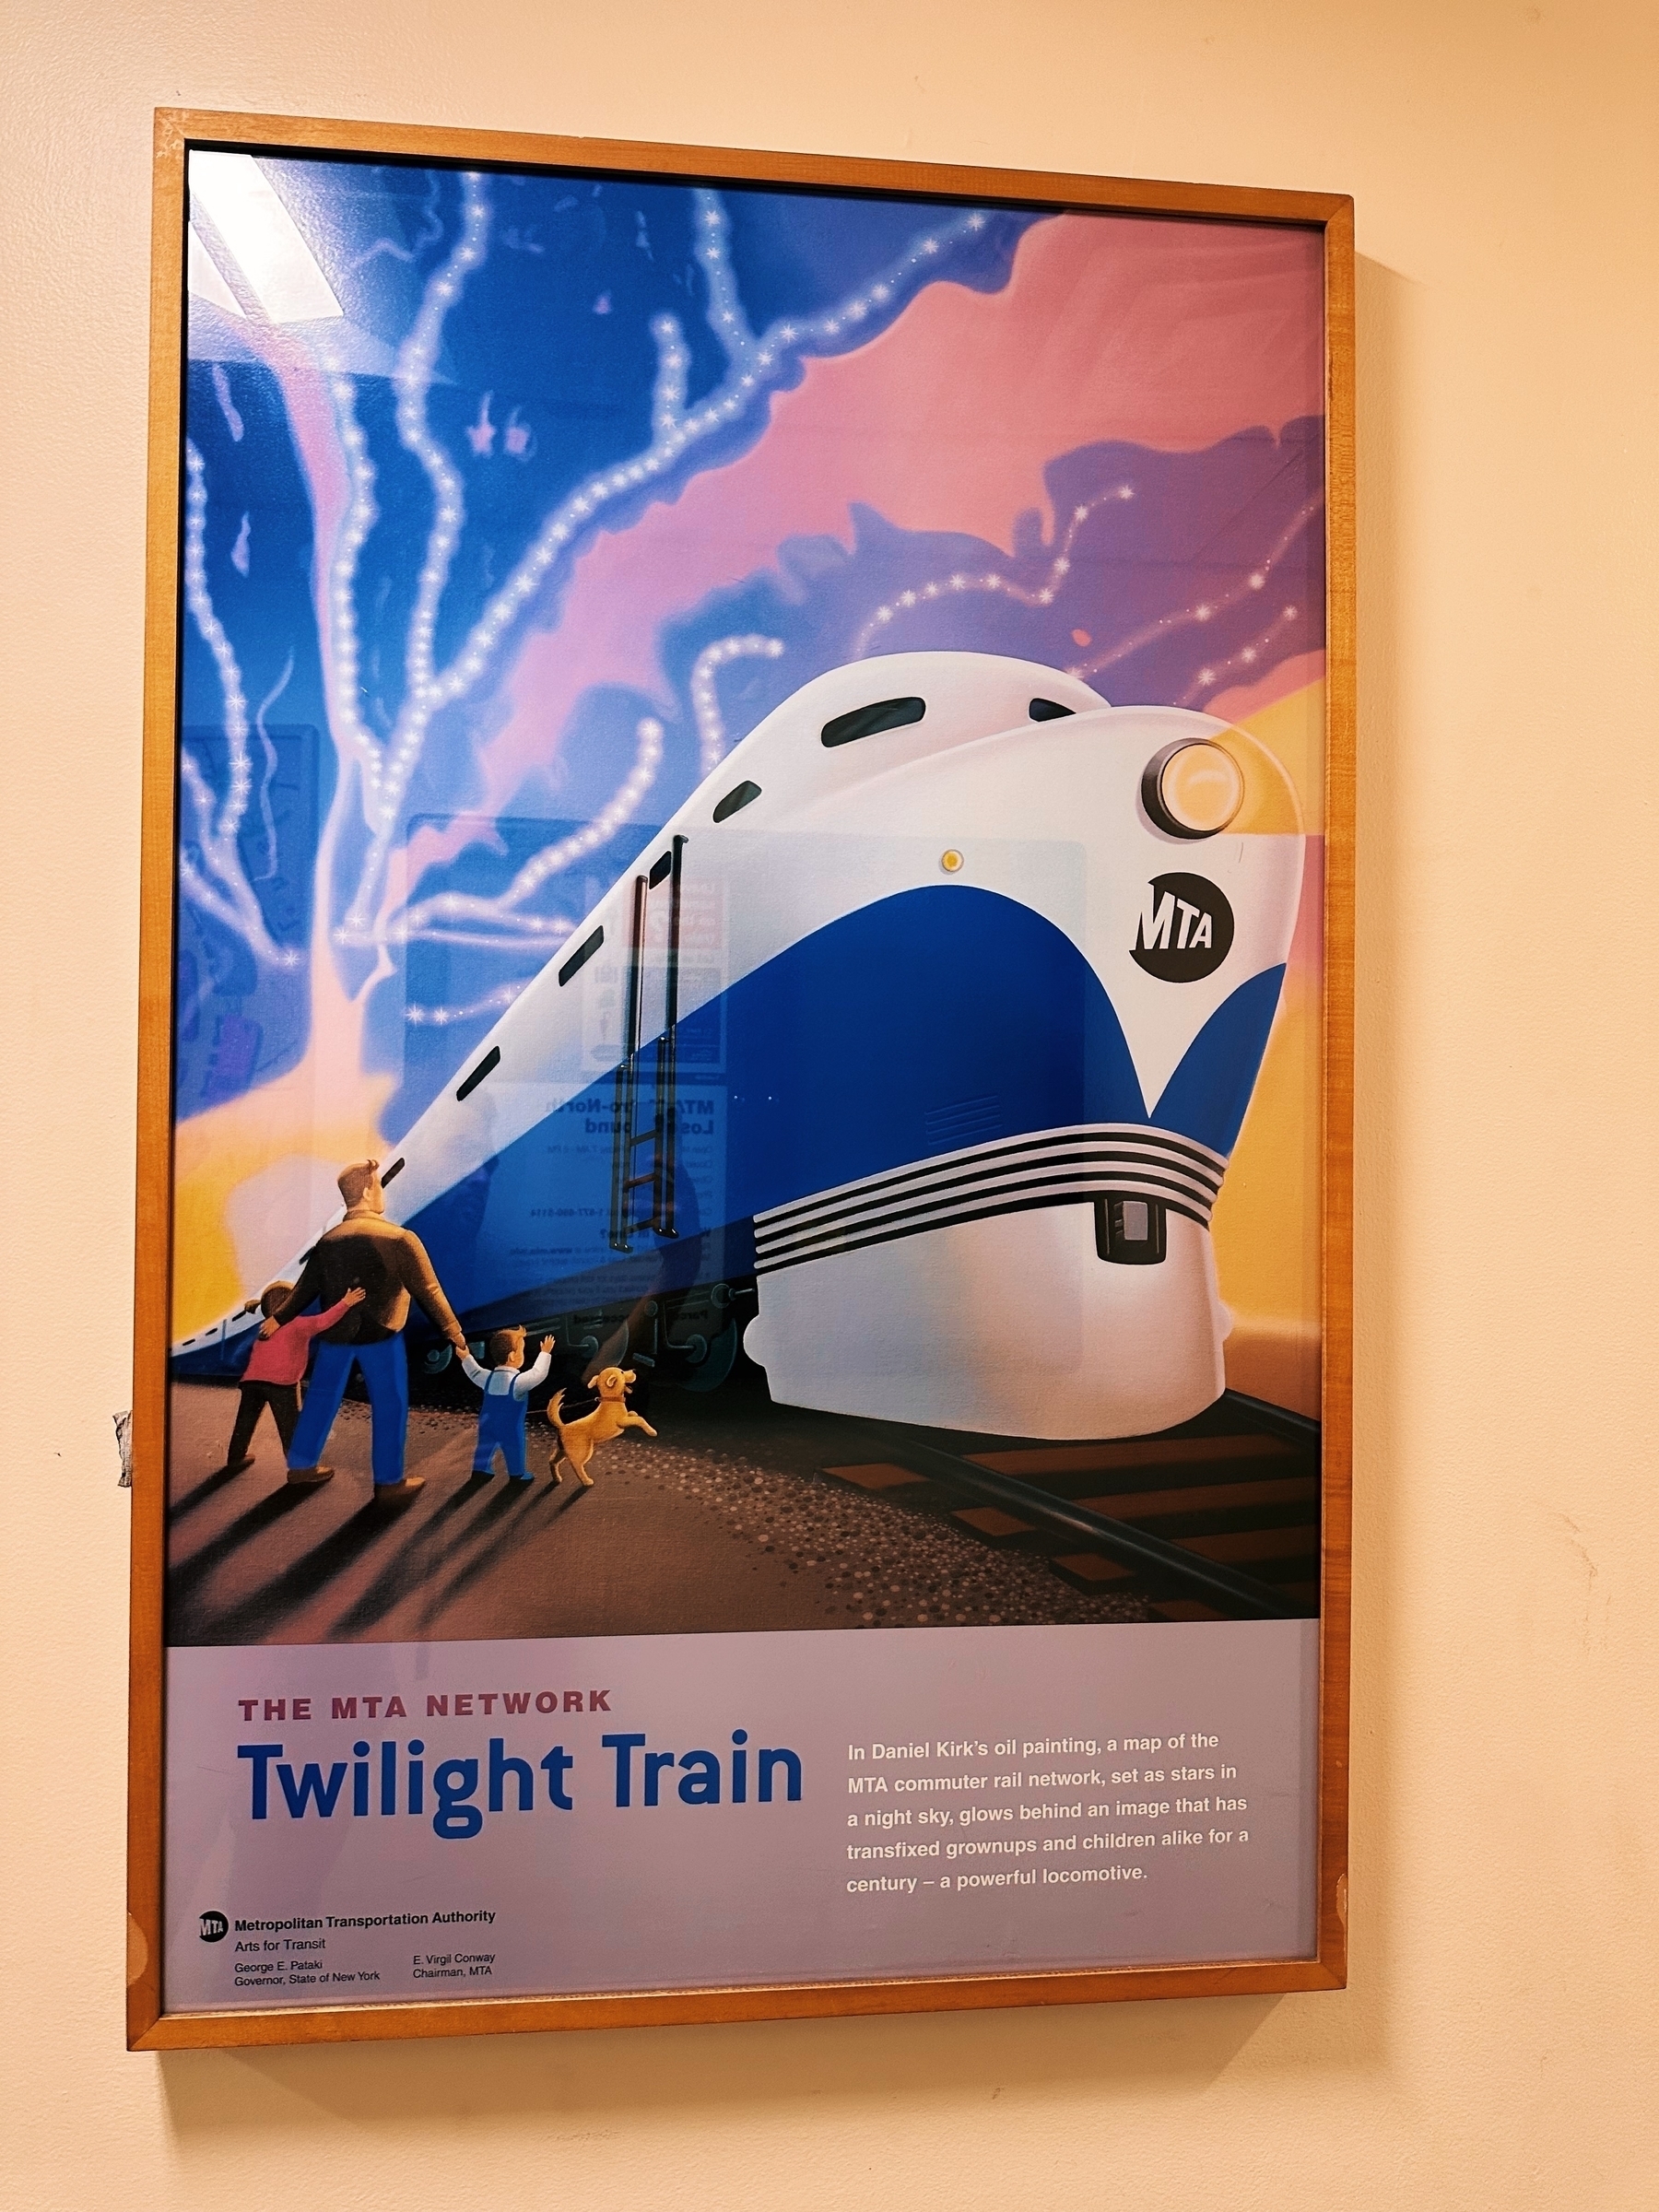 An art deco style art print called Twilight Train of people standing outside a futuristic looking train